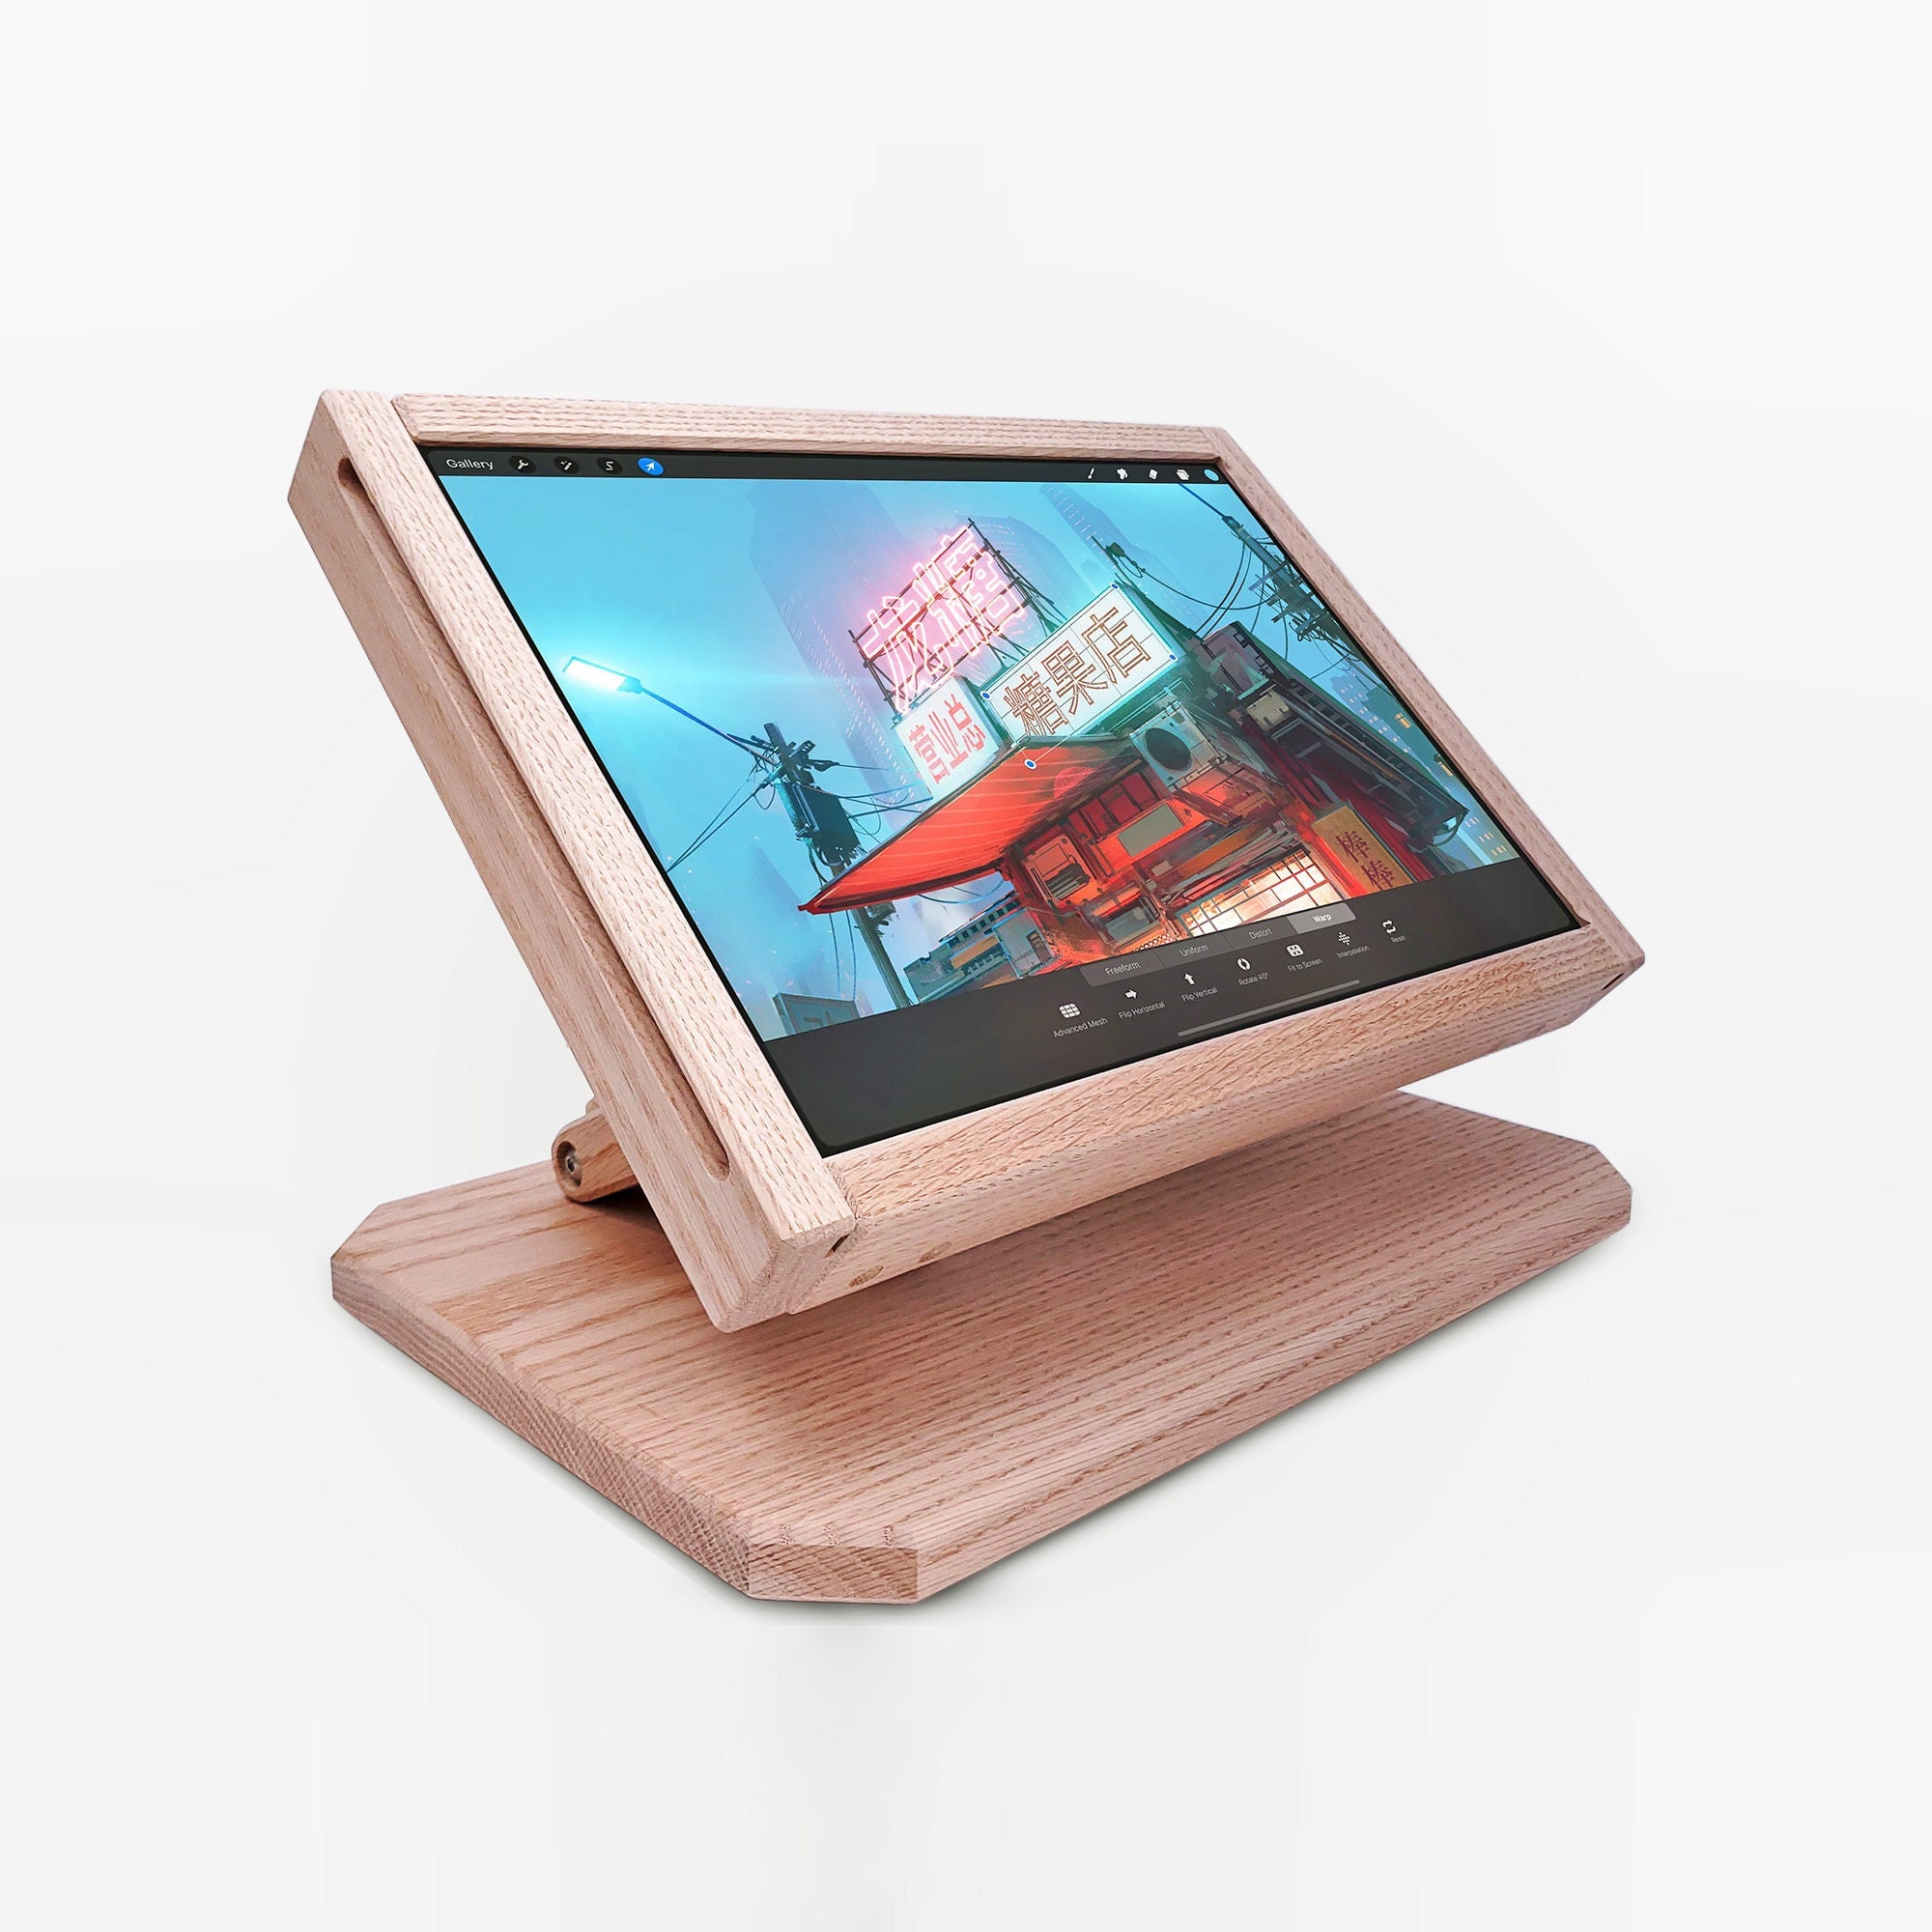 Wooden Stand - Foter